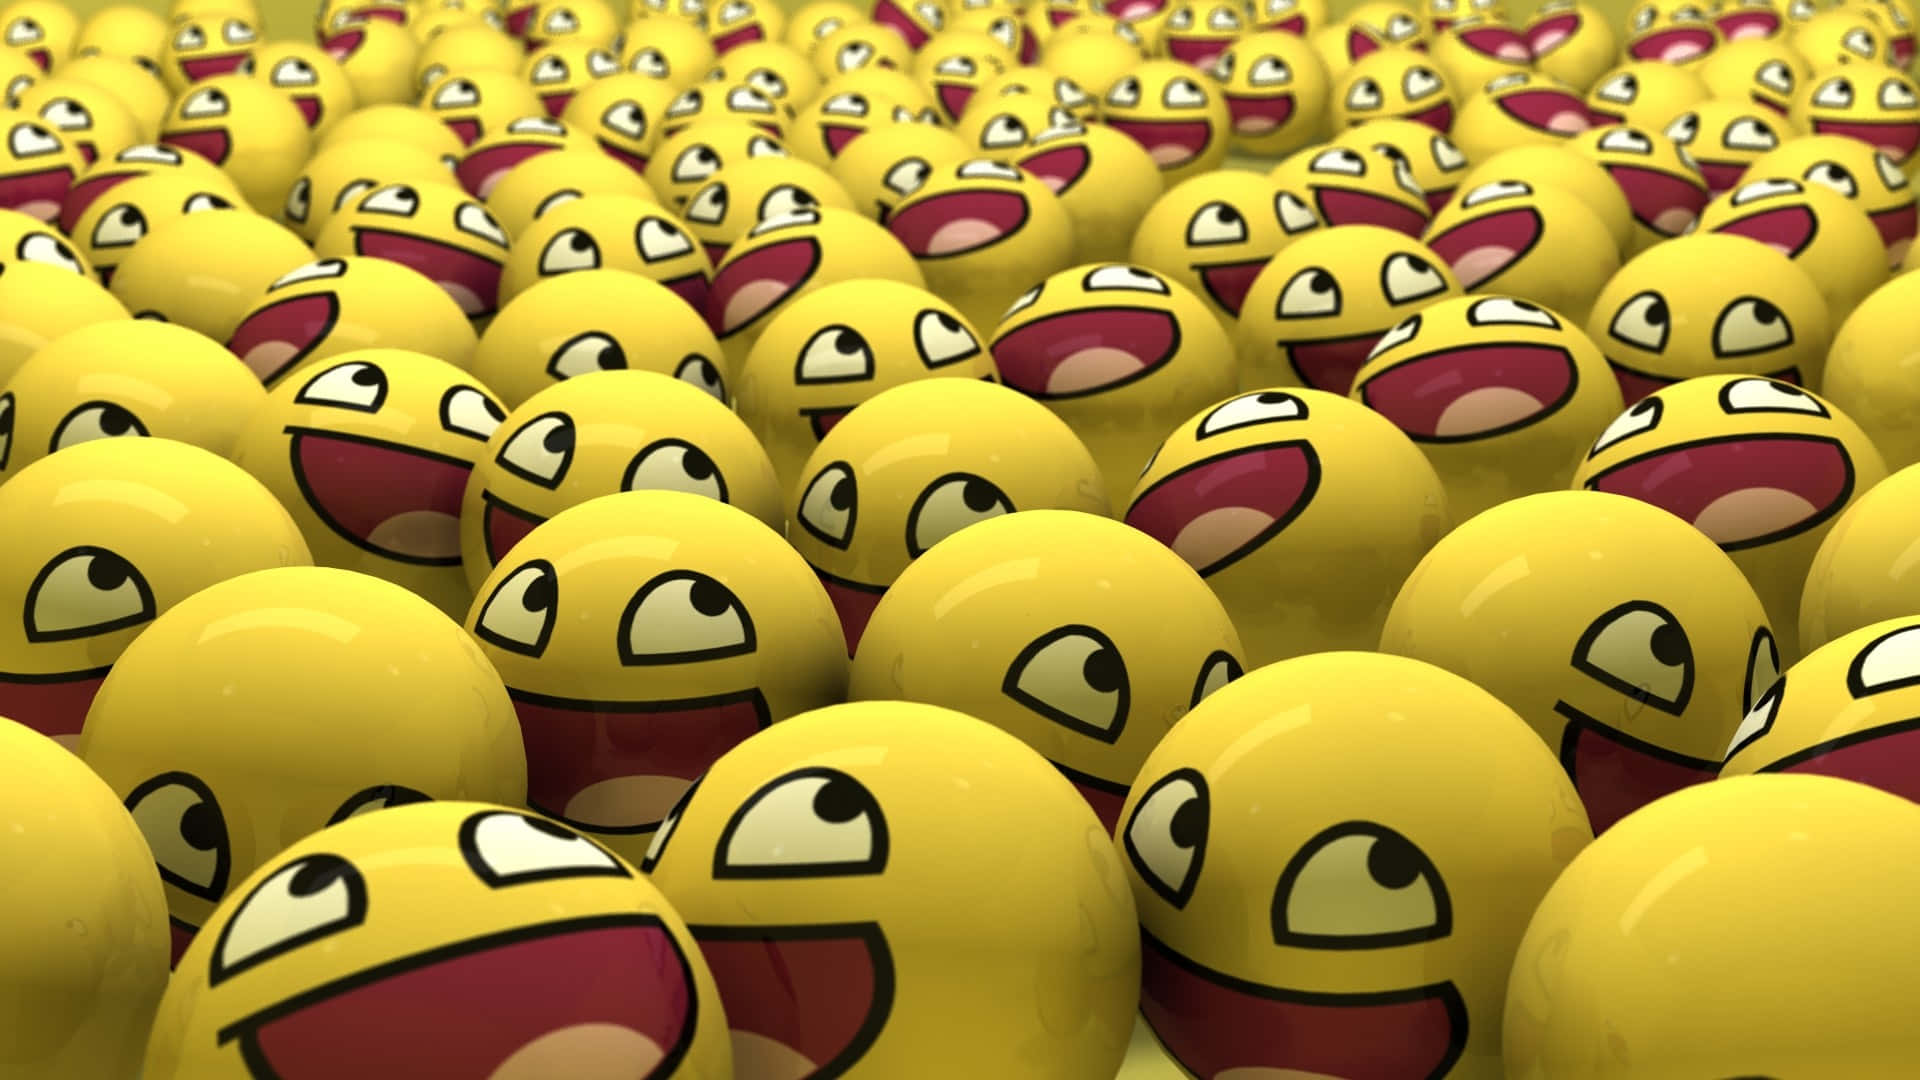 A Group Of Yellow Eggs With Faces Wallpaper